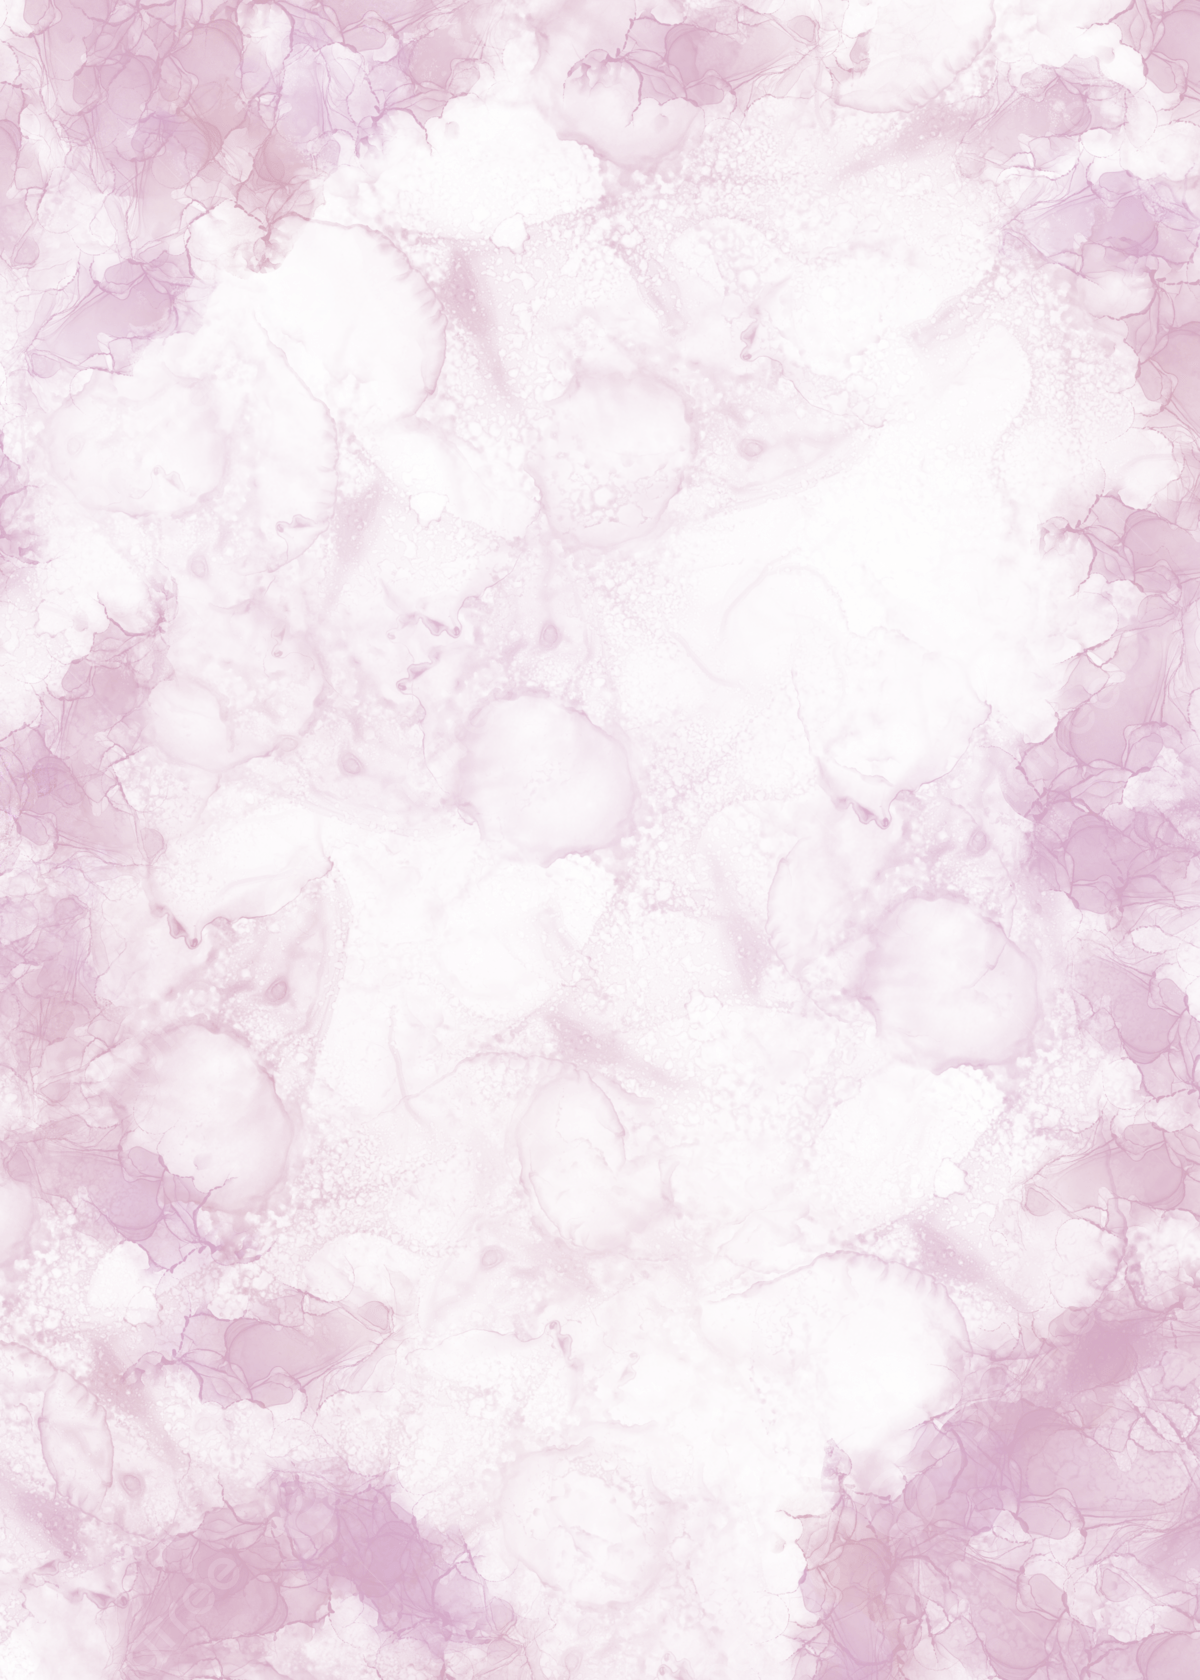 Pastel Purple Ink Background Wallpaper Image For Free Download